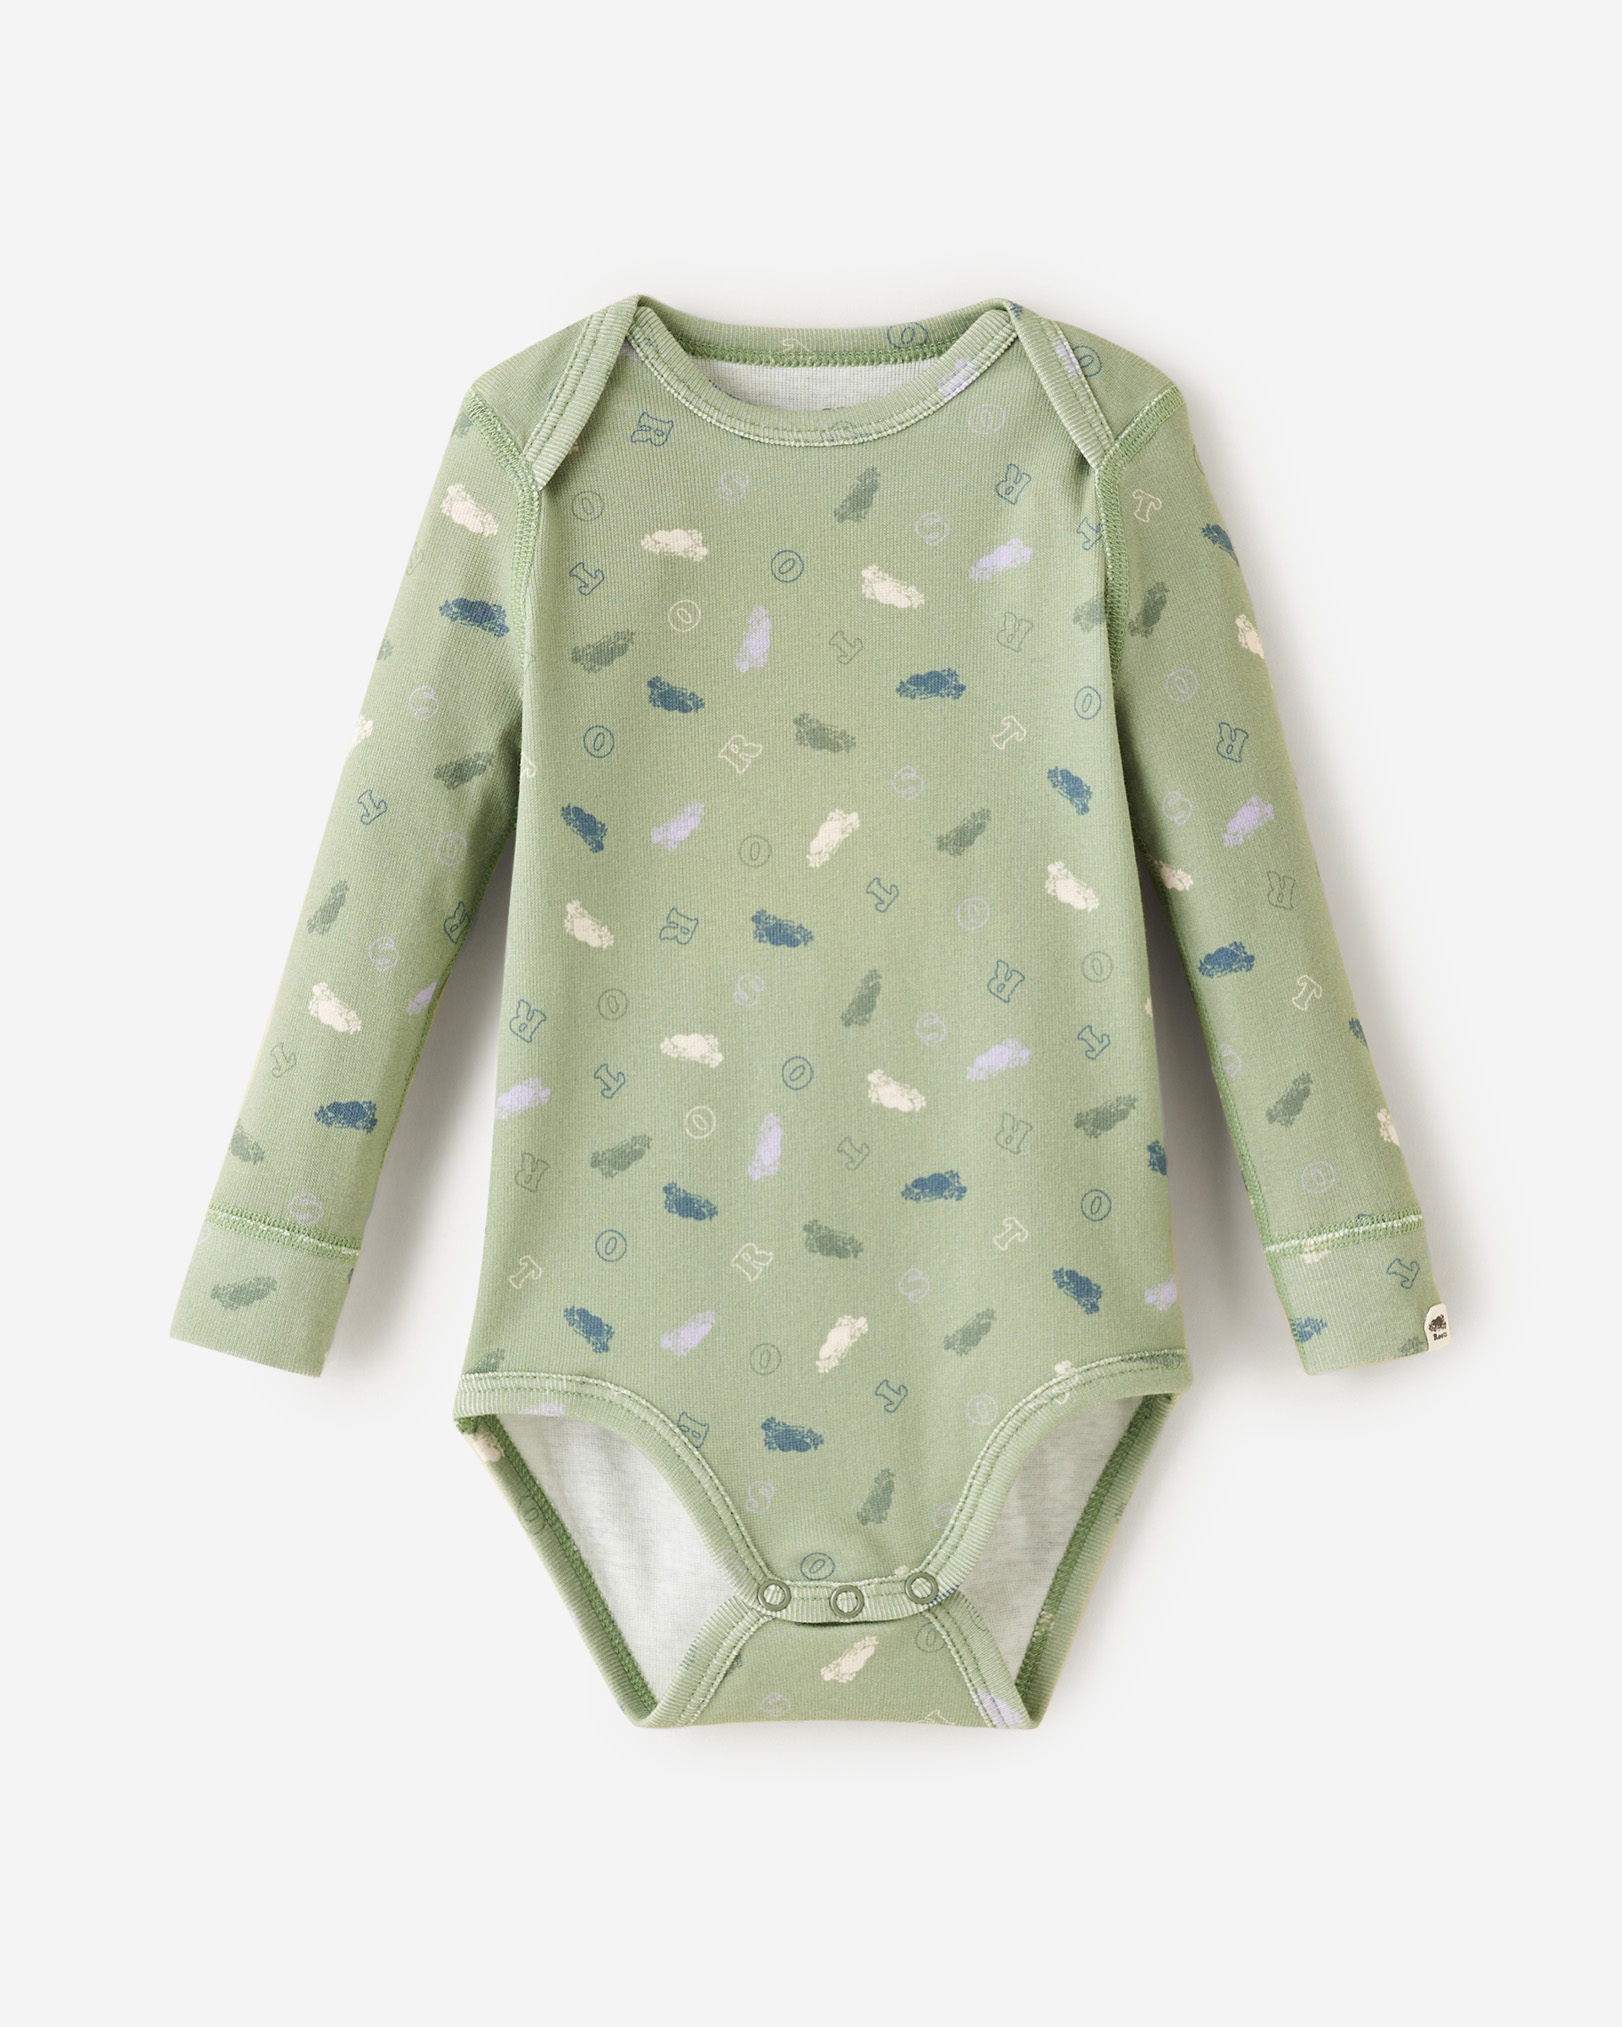 Roots Baby's First Bodysuit in Cactus Green